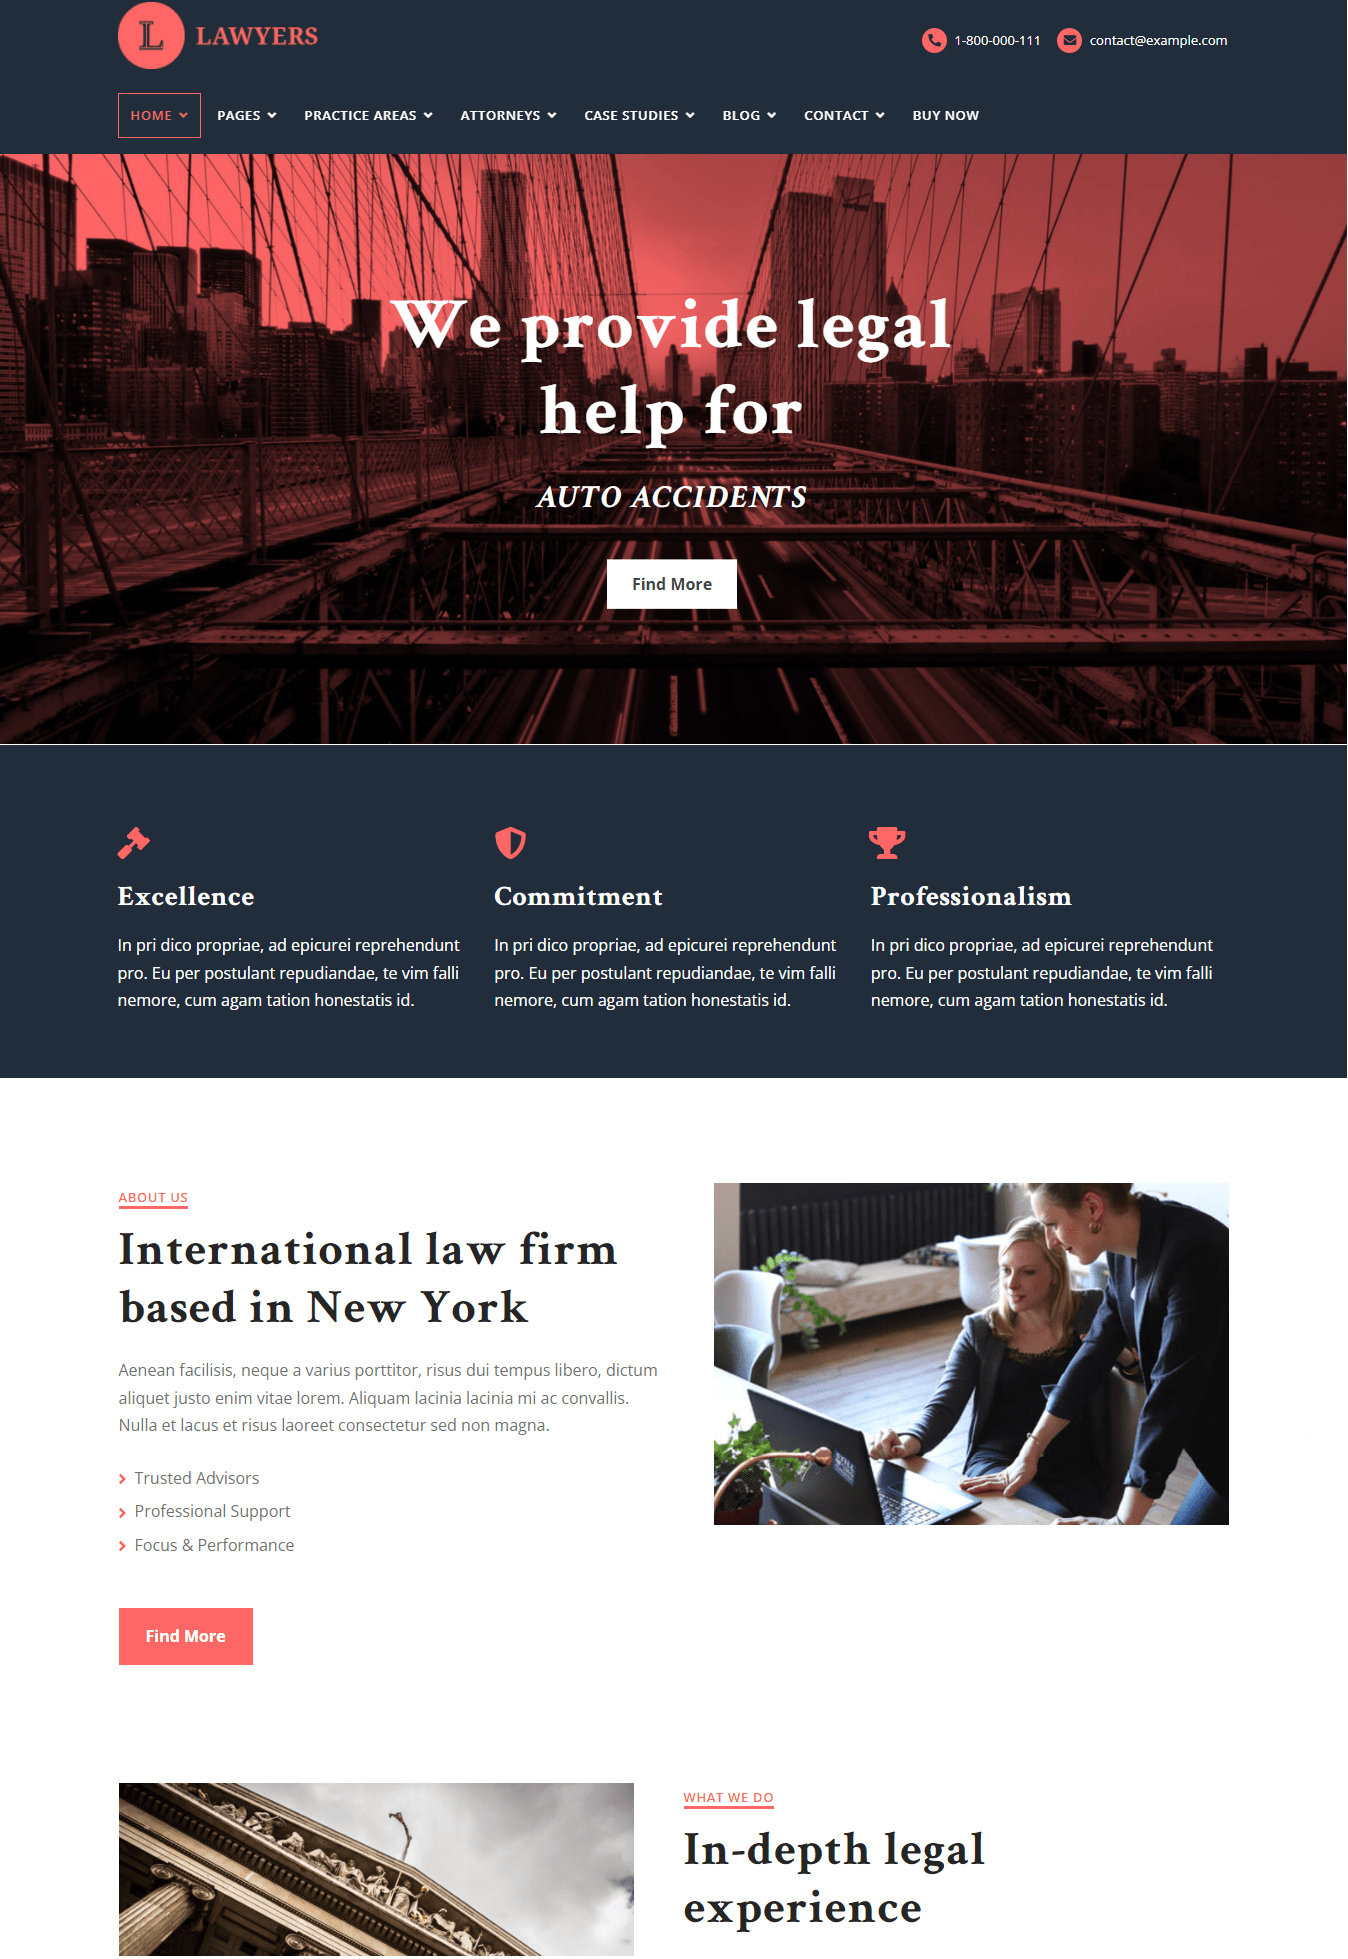 WordPress Themes for Law Firms